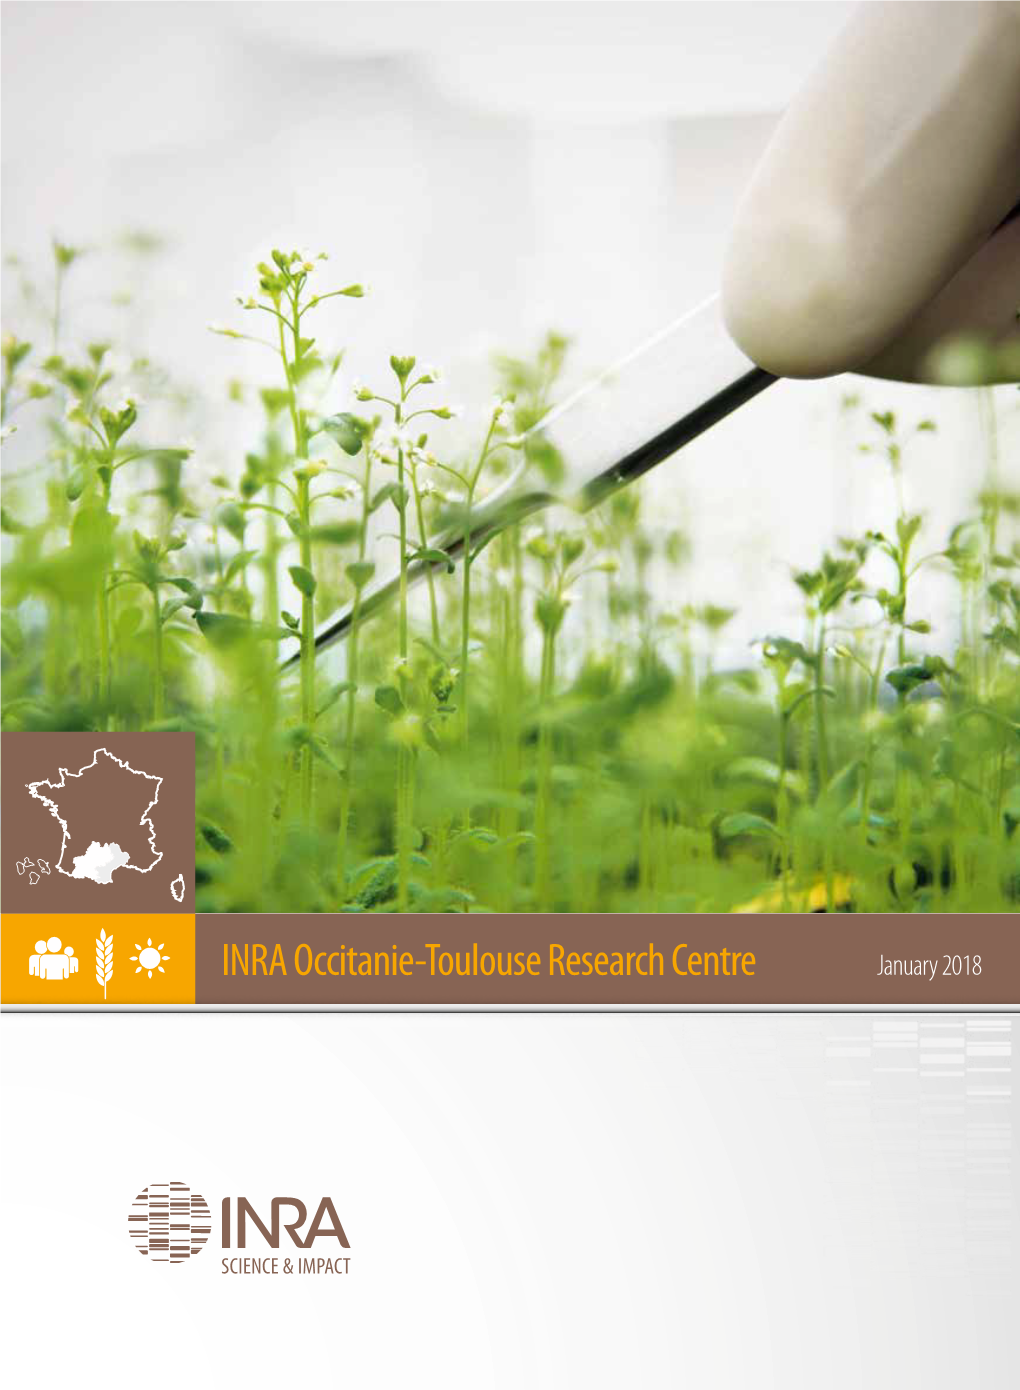 INRA Occitanie-Toulouse Research Centre